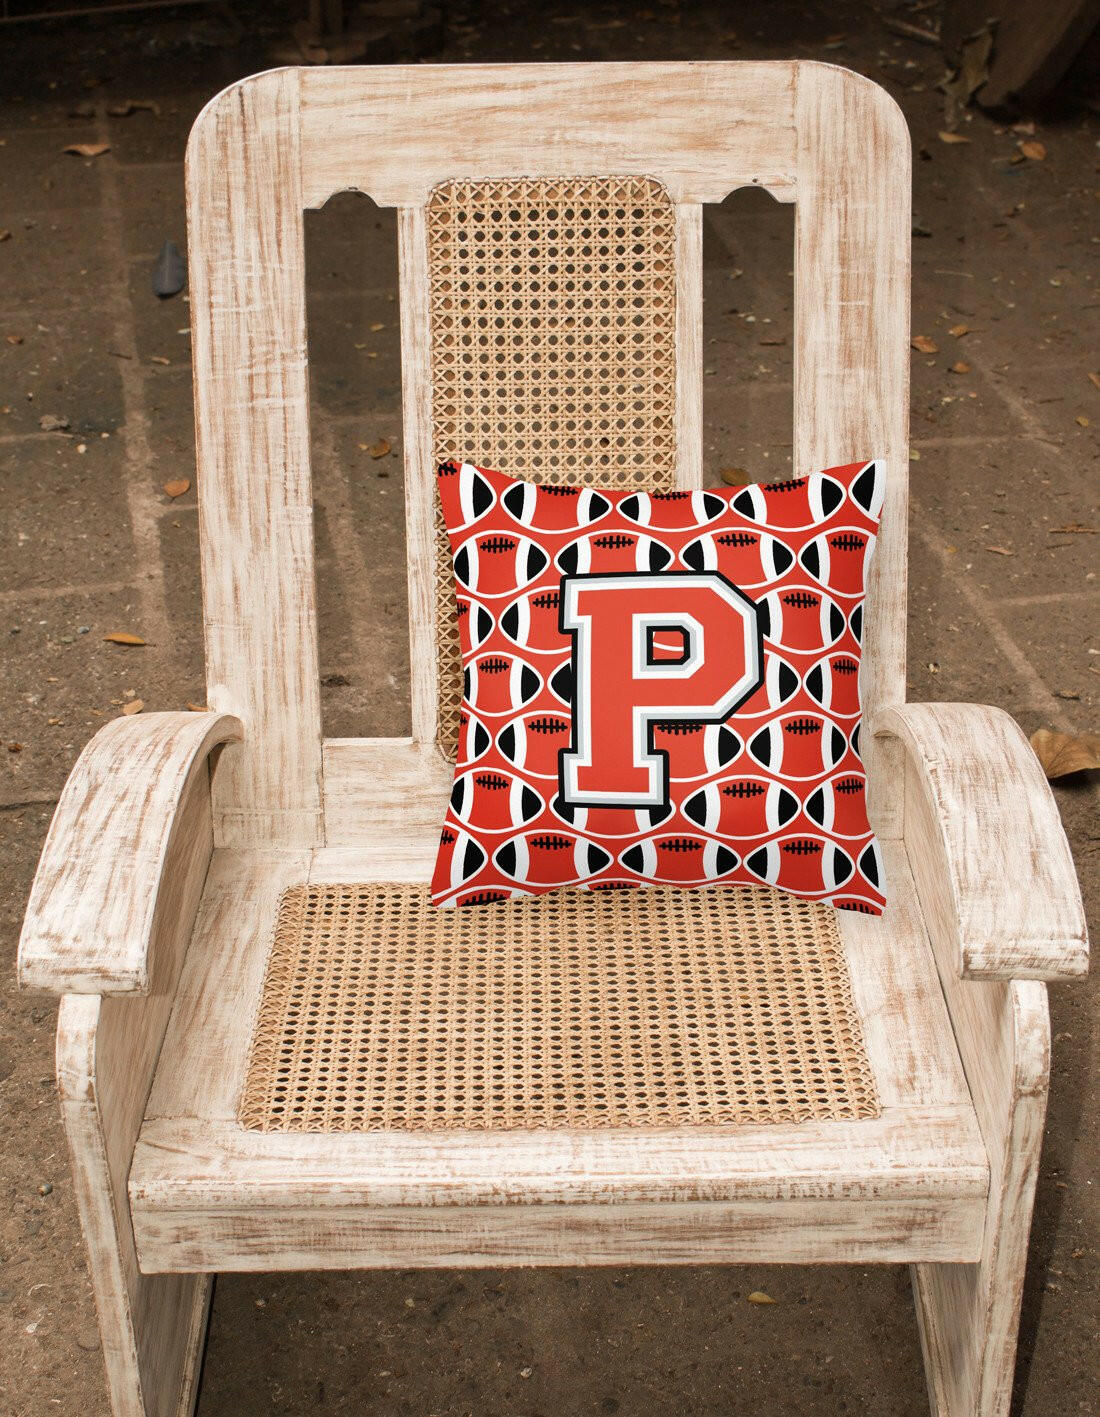 Letter P Football Scarlet and Grey Fabric Decorative Pillow CJ1067-PPW1414 by Caroline's Treasures